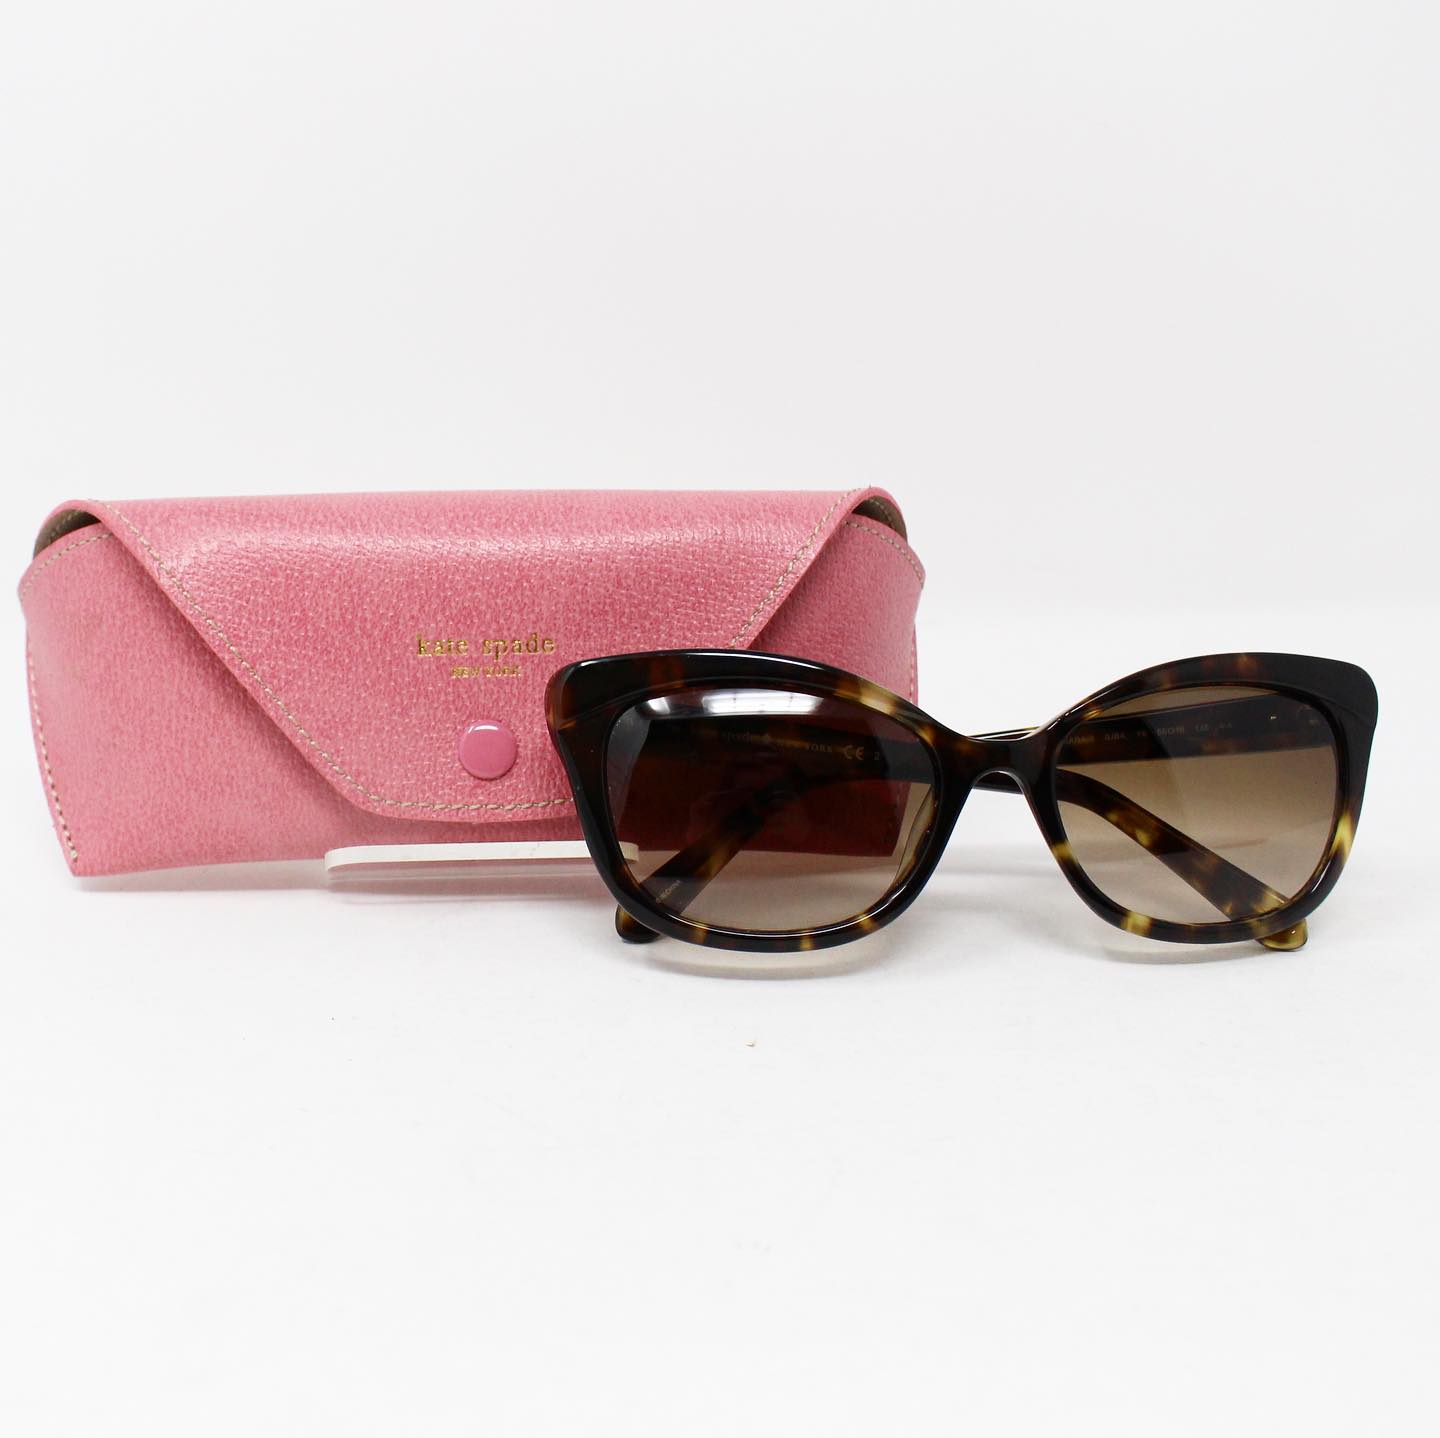 KATE SPADE Brown Tortoise Sunglasses #28115 – ALL YOUR BLISS